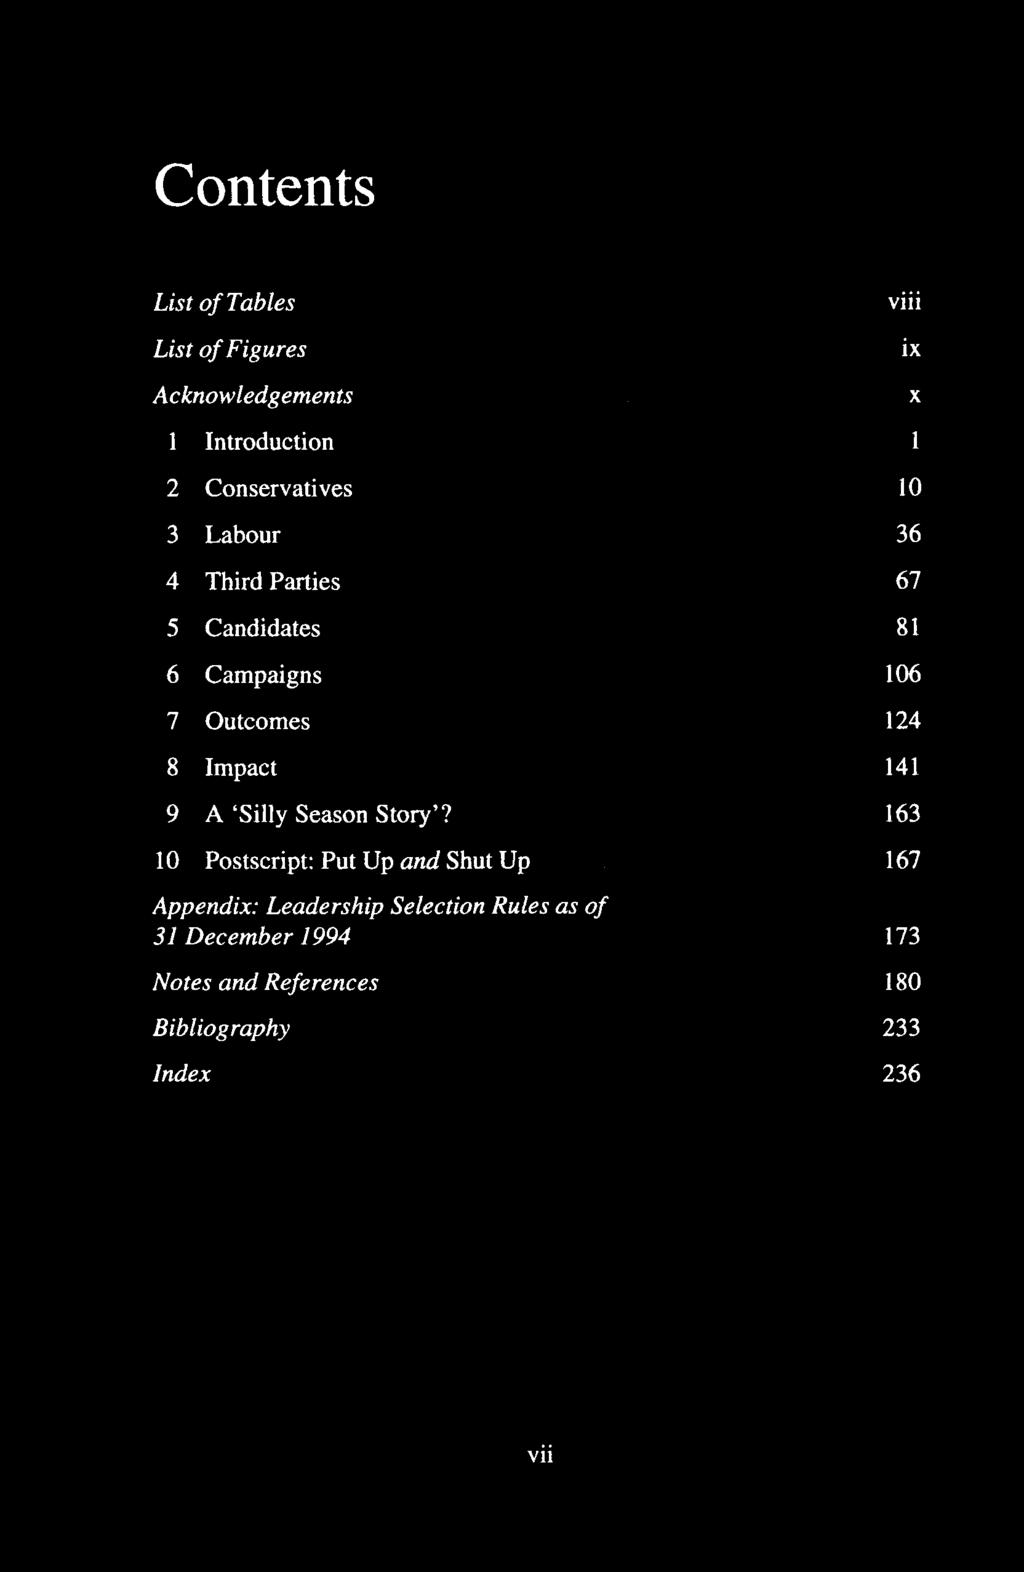 Contents List of Tables List of Figures Acknowledgements Introduction 2 Conservatives lo 3 Labour 36 4 Third Parties 67 5 Candidates 81 6 Campaigns 106 7 Outcomes 124 8 Impact 141 9 A